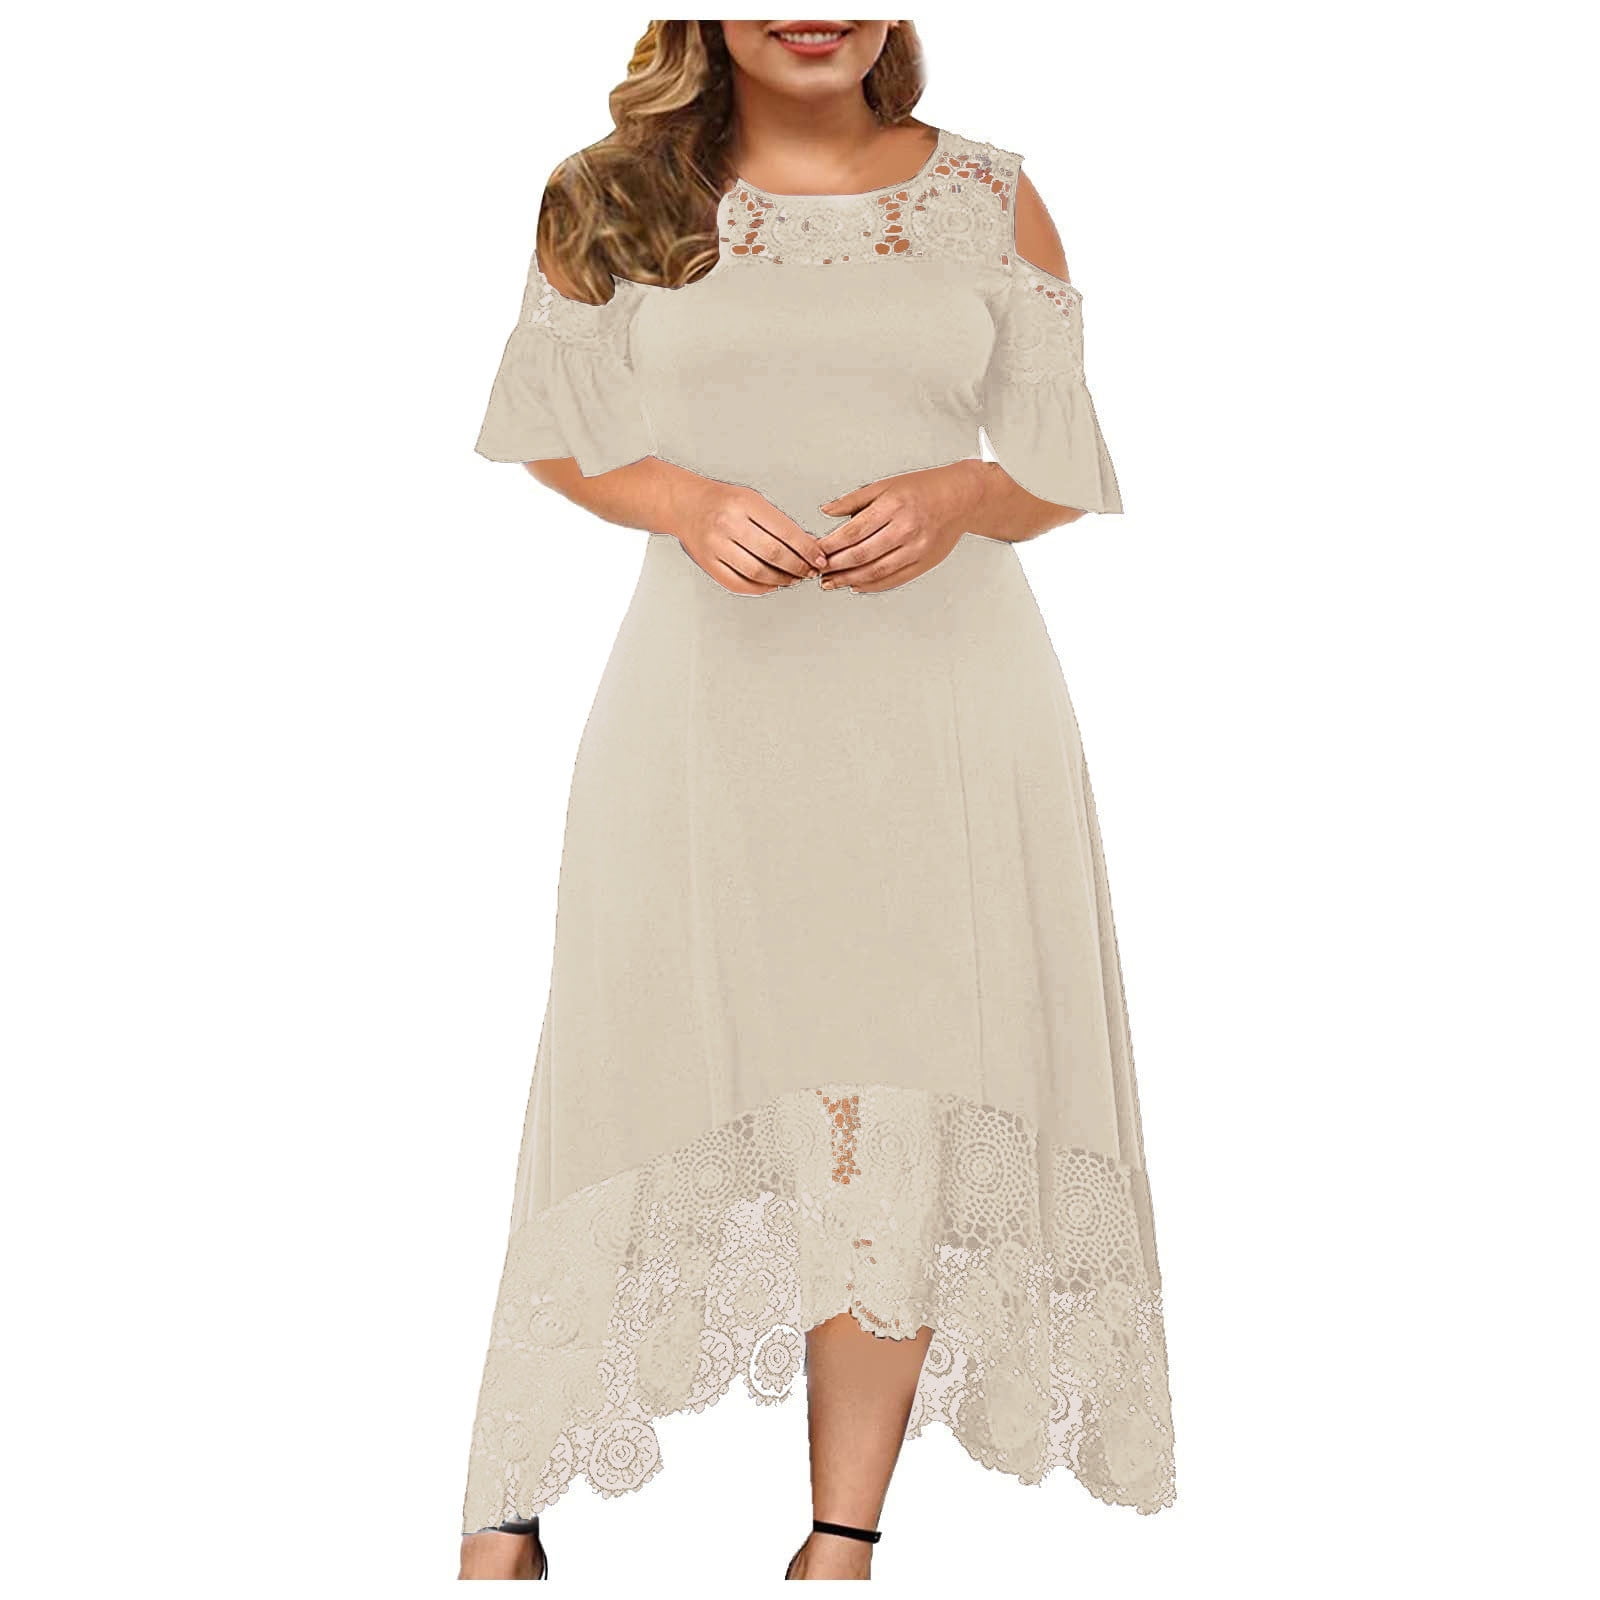 Anden klasse forkorte kapital Gifts For Mom,POROPL White Graduation Dress for Girl Plus Size Sexy Ruffle  Strapless Splicing Lace Splicing Dress Clearance Beige Size 14 - Walmart.com